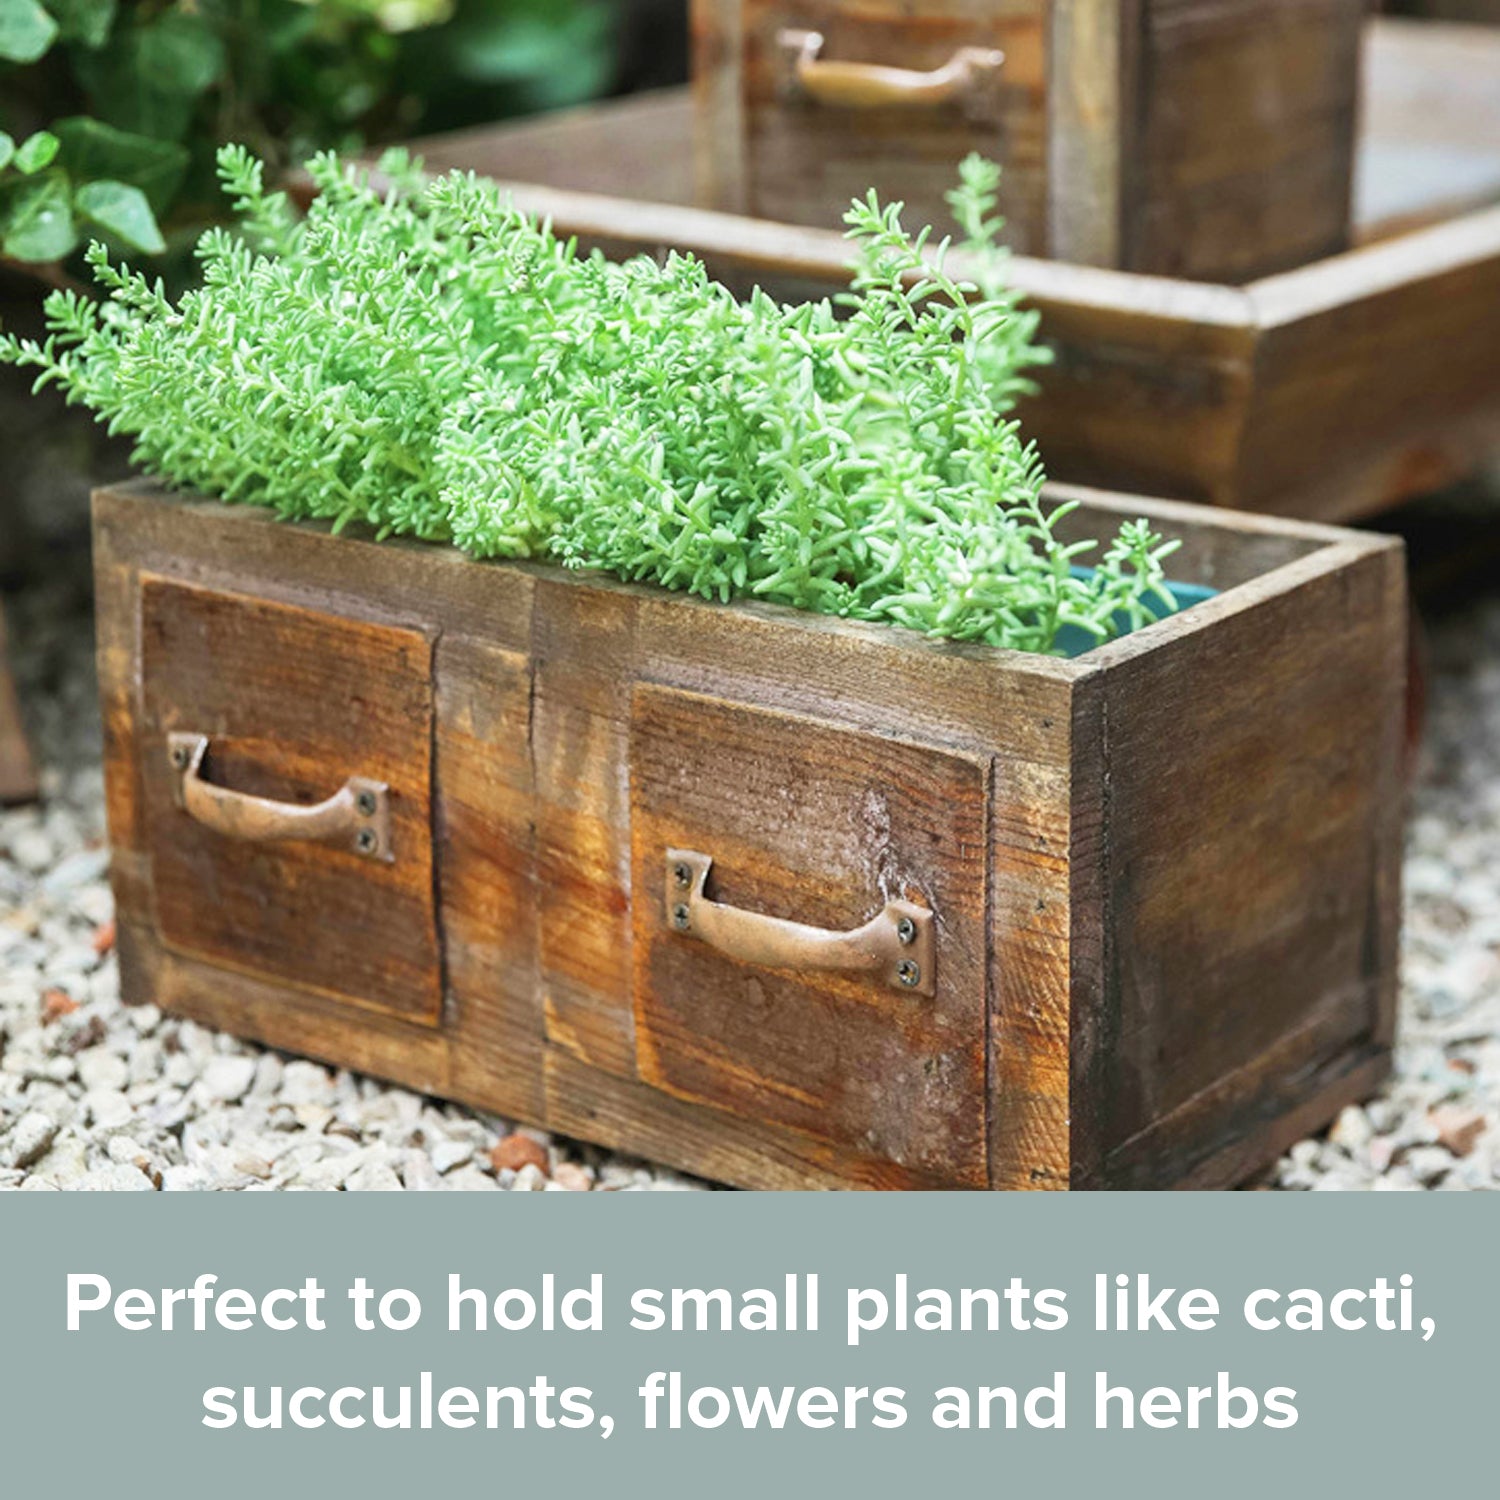 Load image into Gallery viewer, Country Style Wood Planter Box | Decorative Wooden Boxes for Flower Arrangements